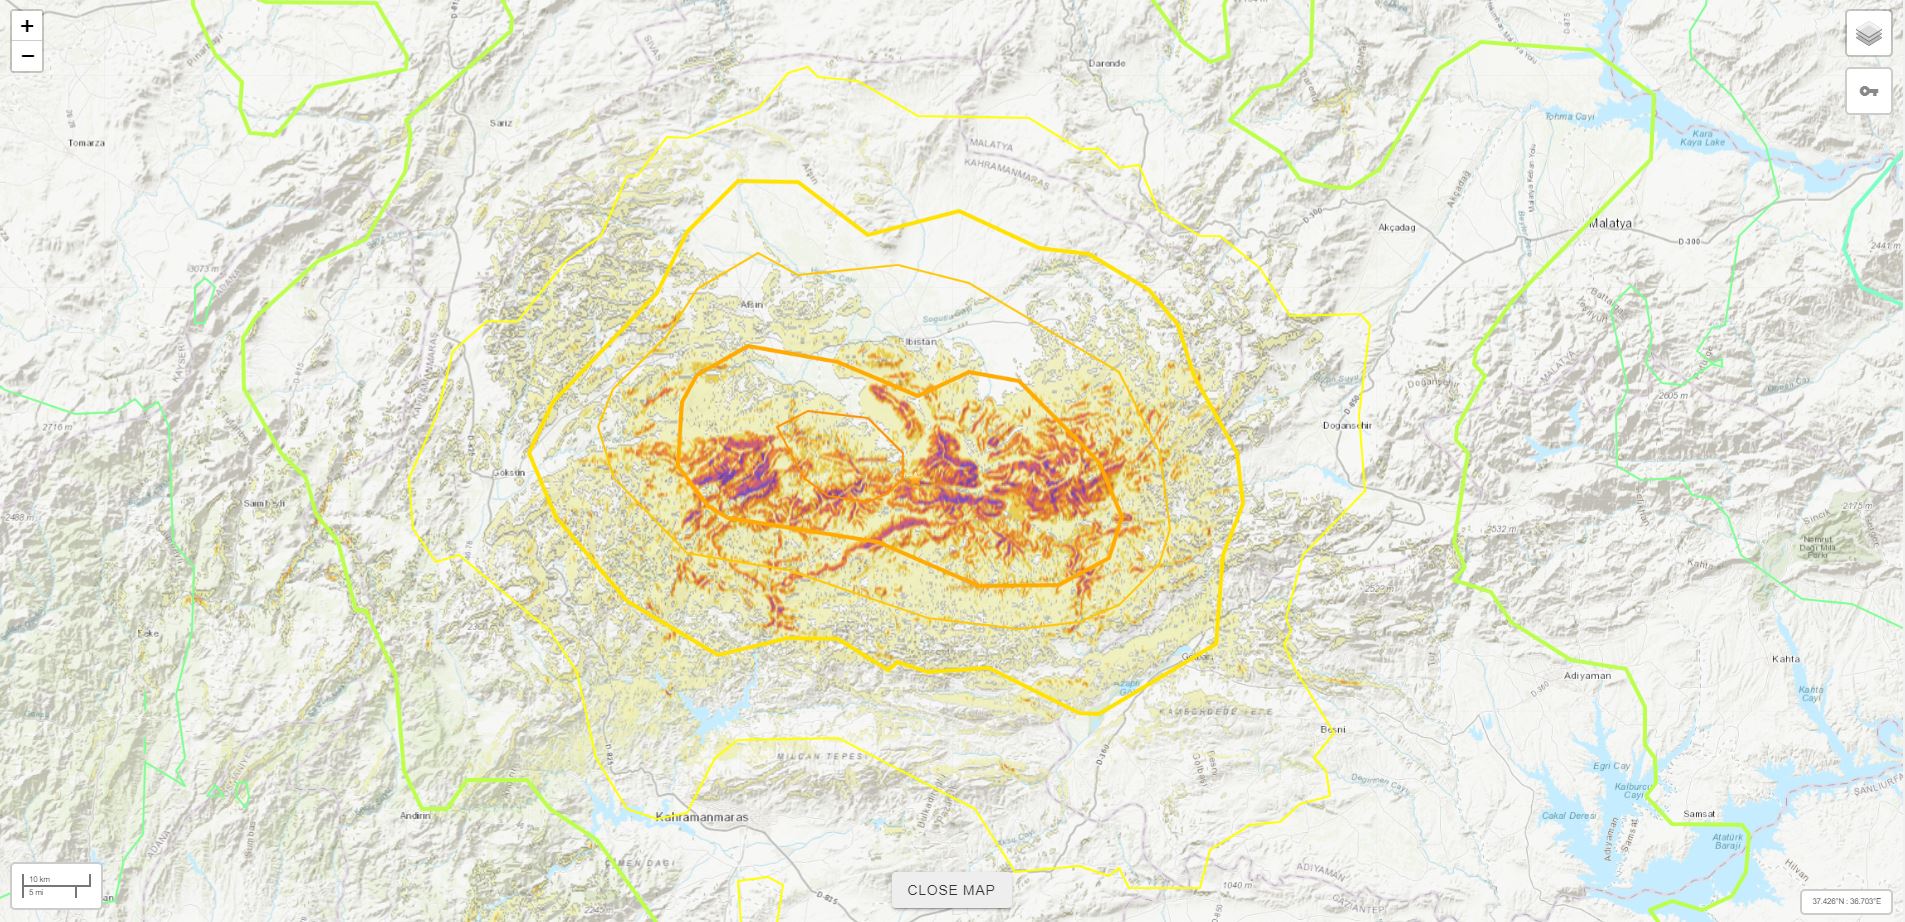 USGS landslide probability map for the 6 February 2023 Mw=7.5 Turkey-Syria earthquake.